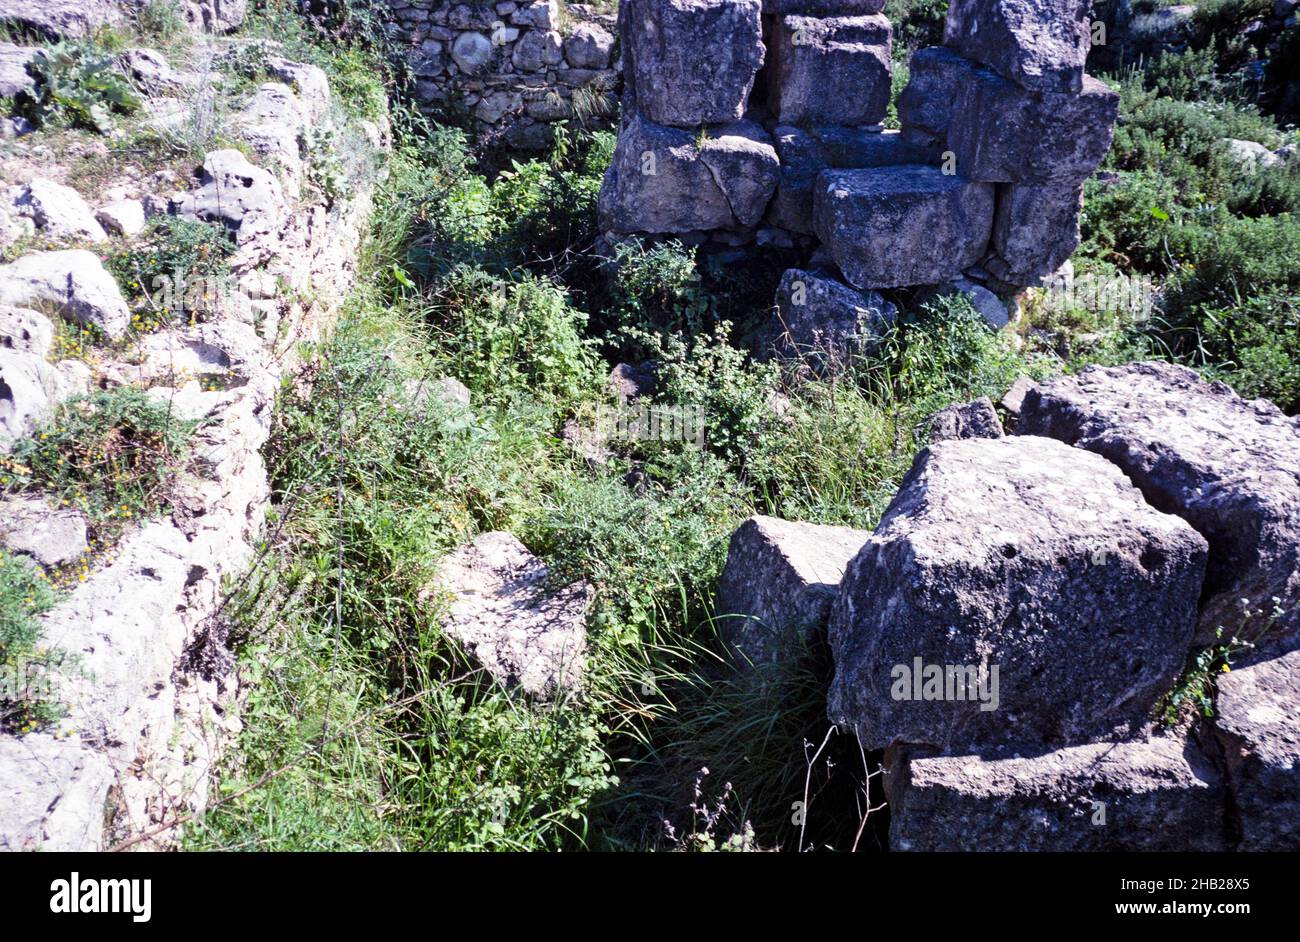 Prehistoric archaeological site at Ugarit, Syria in 1998 - Temple of Baal Stock Photo